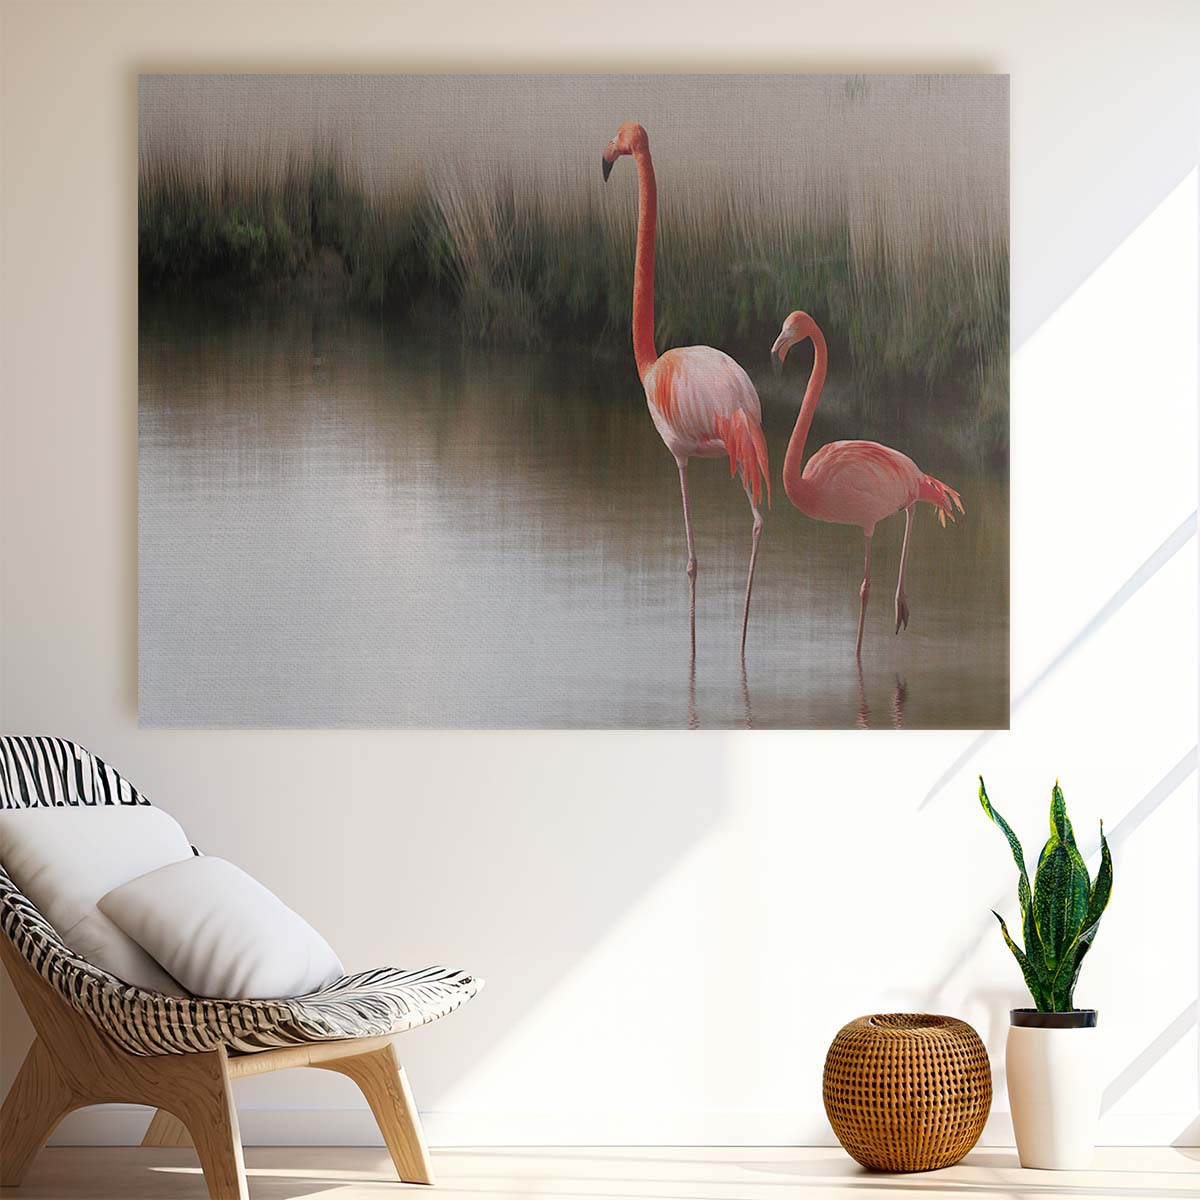 Romantic Flamingo Sunset Pair Love Wall Art by Luxuriance Designs. Made in USA.